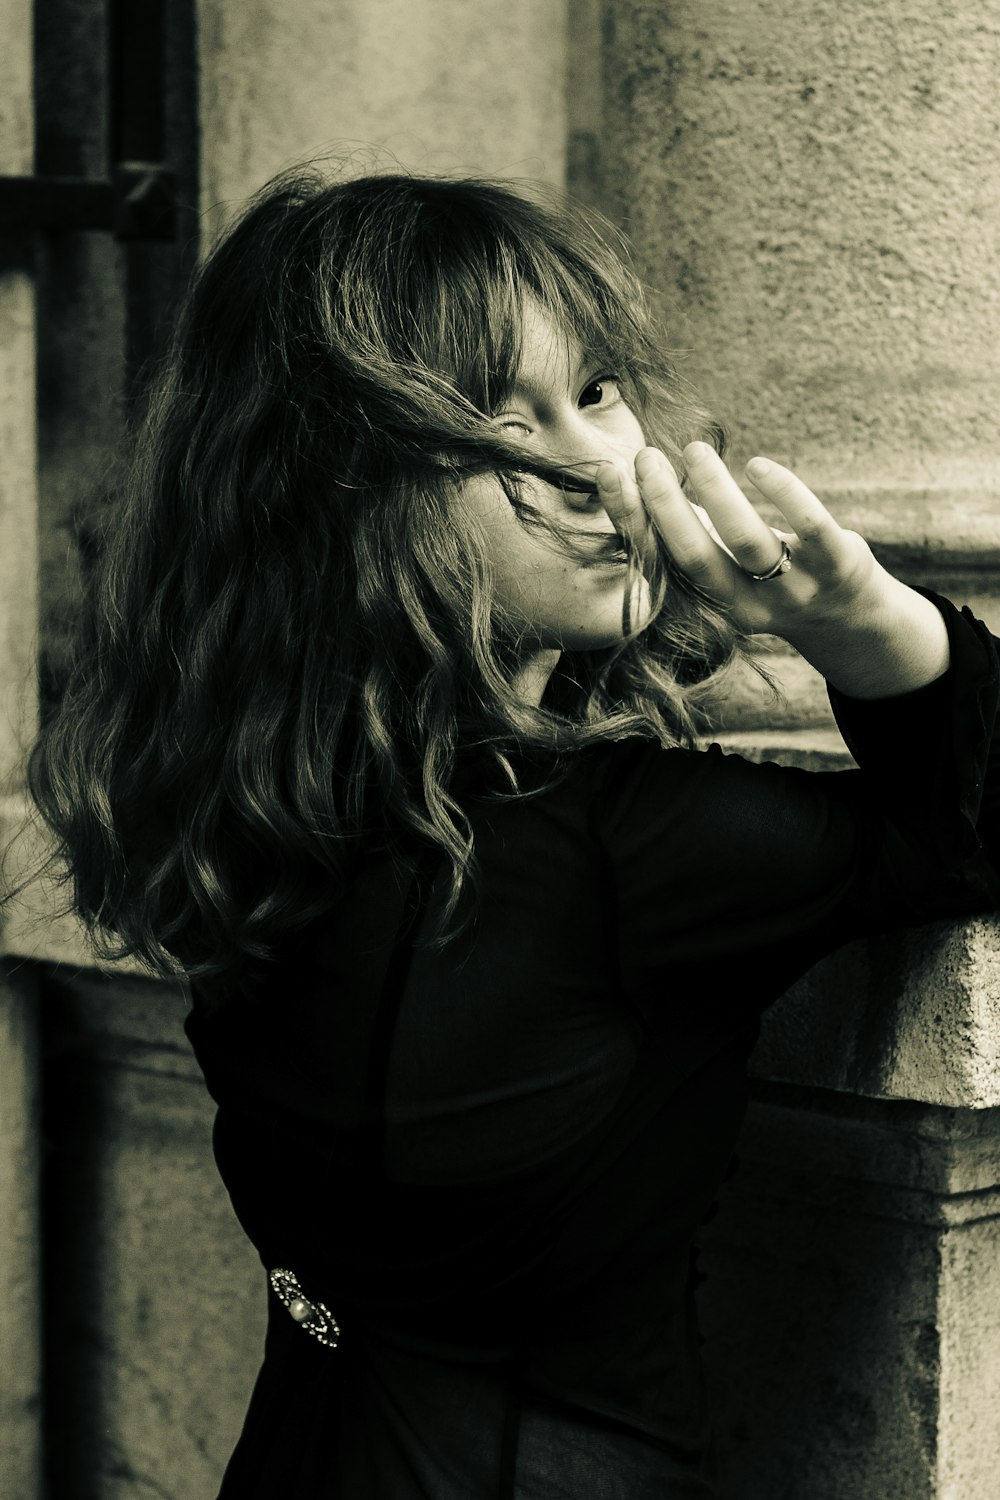 a woman leaning against a wall with her hands on her face